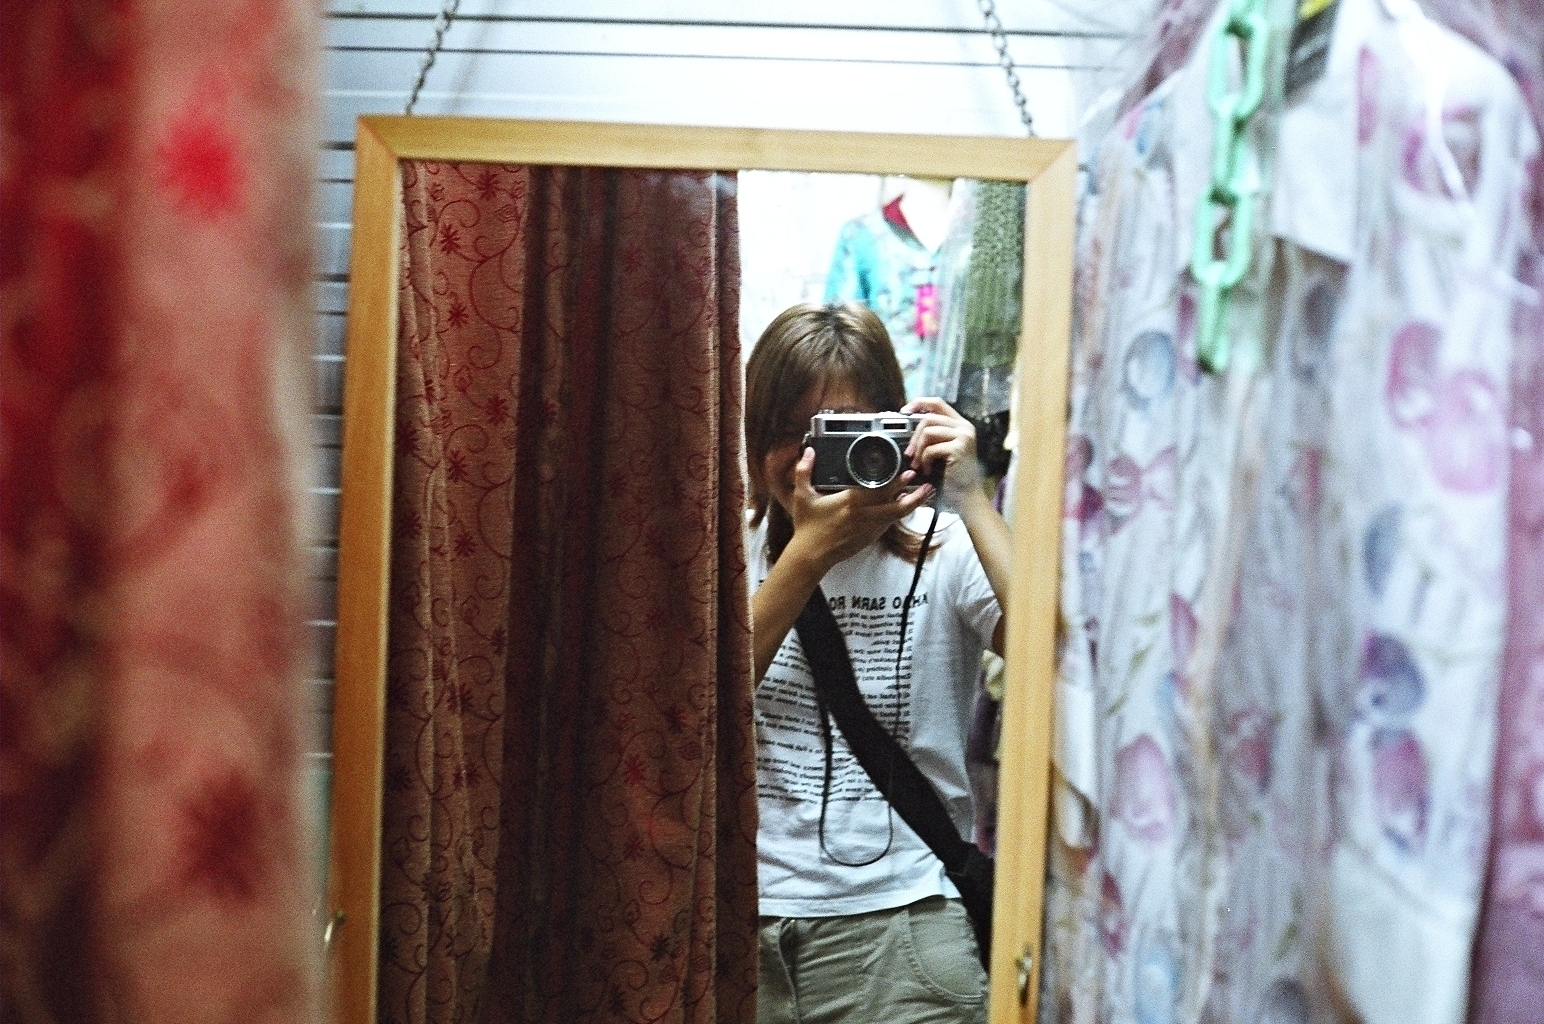 A person taking a photo of themselves in a mirror, holding a retro Yashica Electro 35 camera